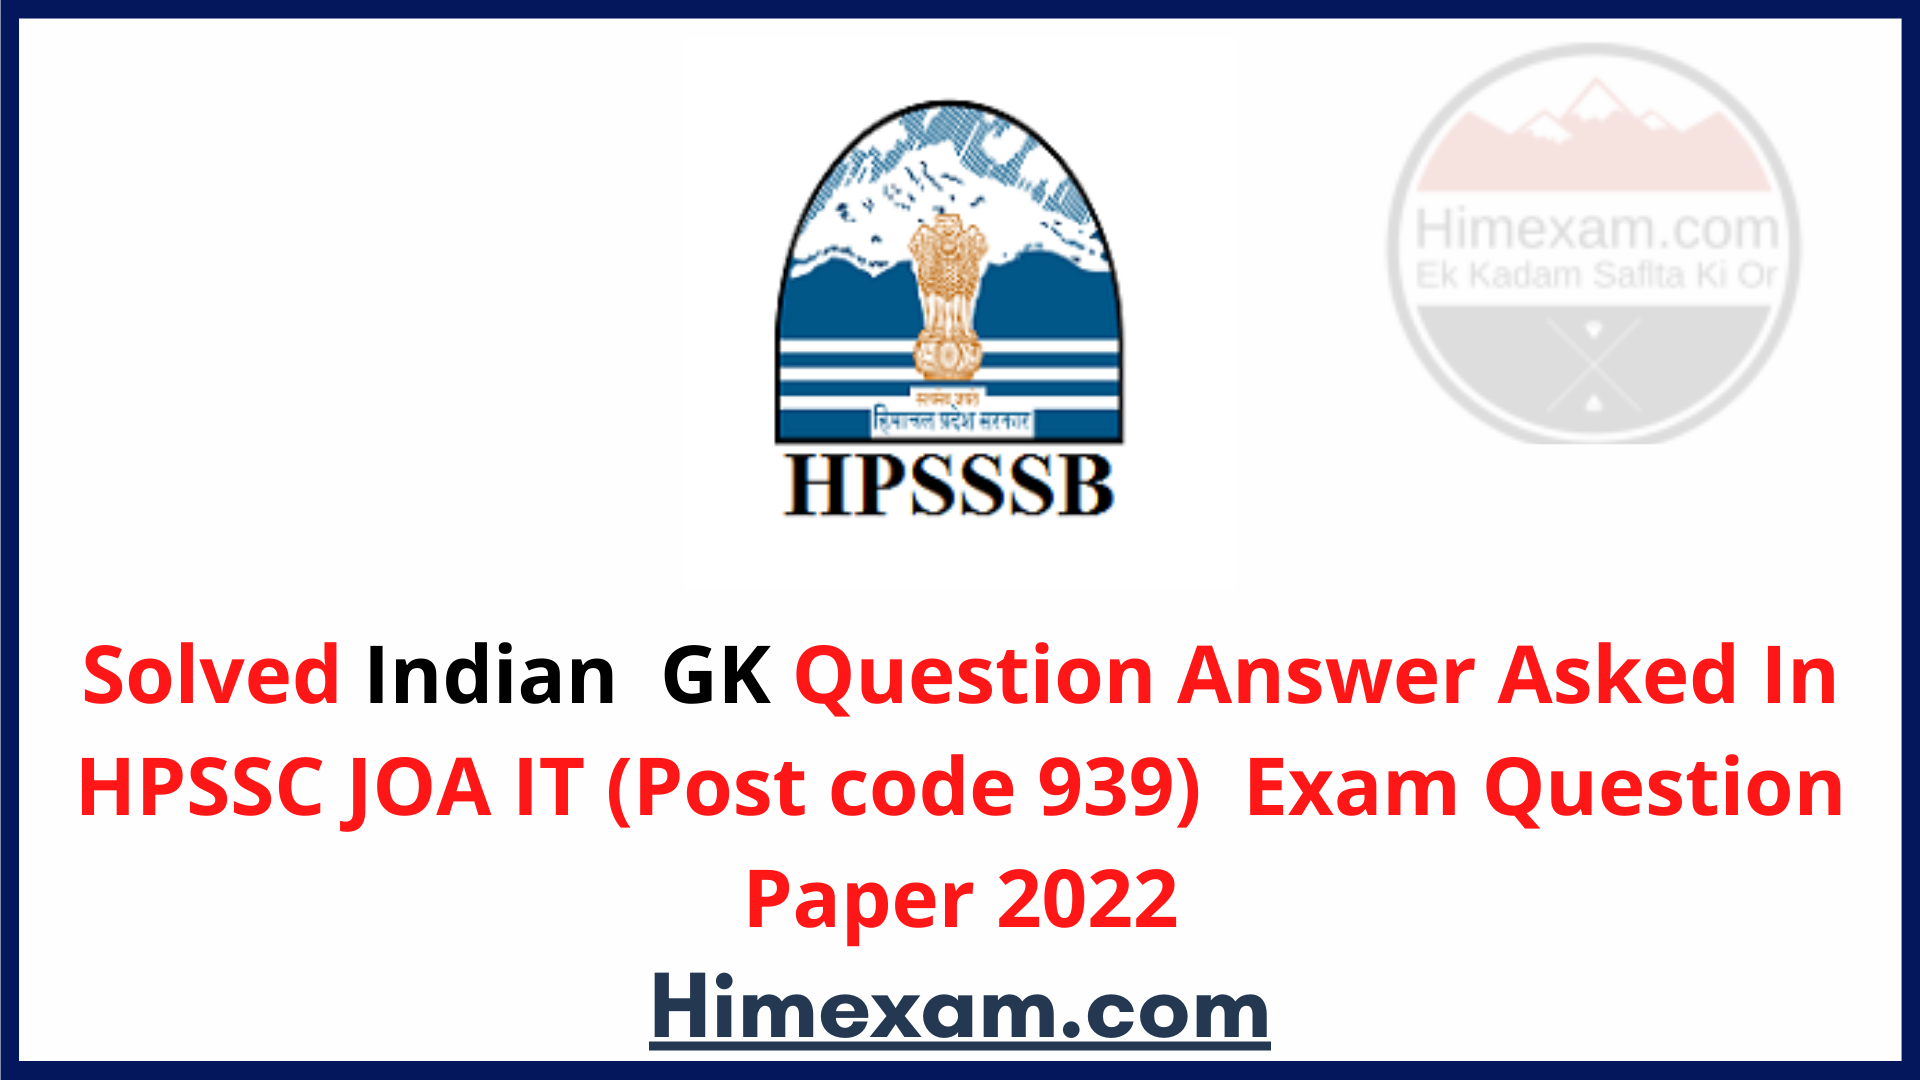 Solved Indian GK Question Asked In HPSSC JOA IT (Post code 939)  Exam Question Paper 2022